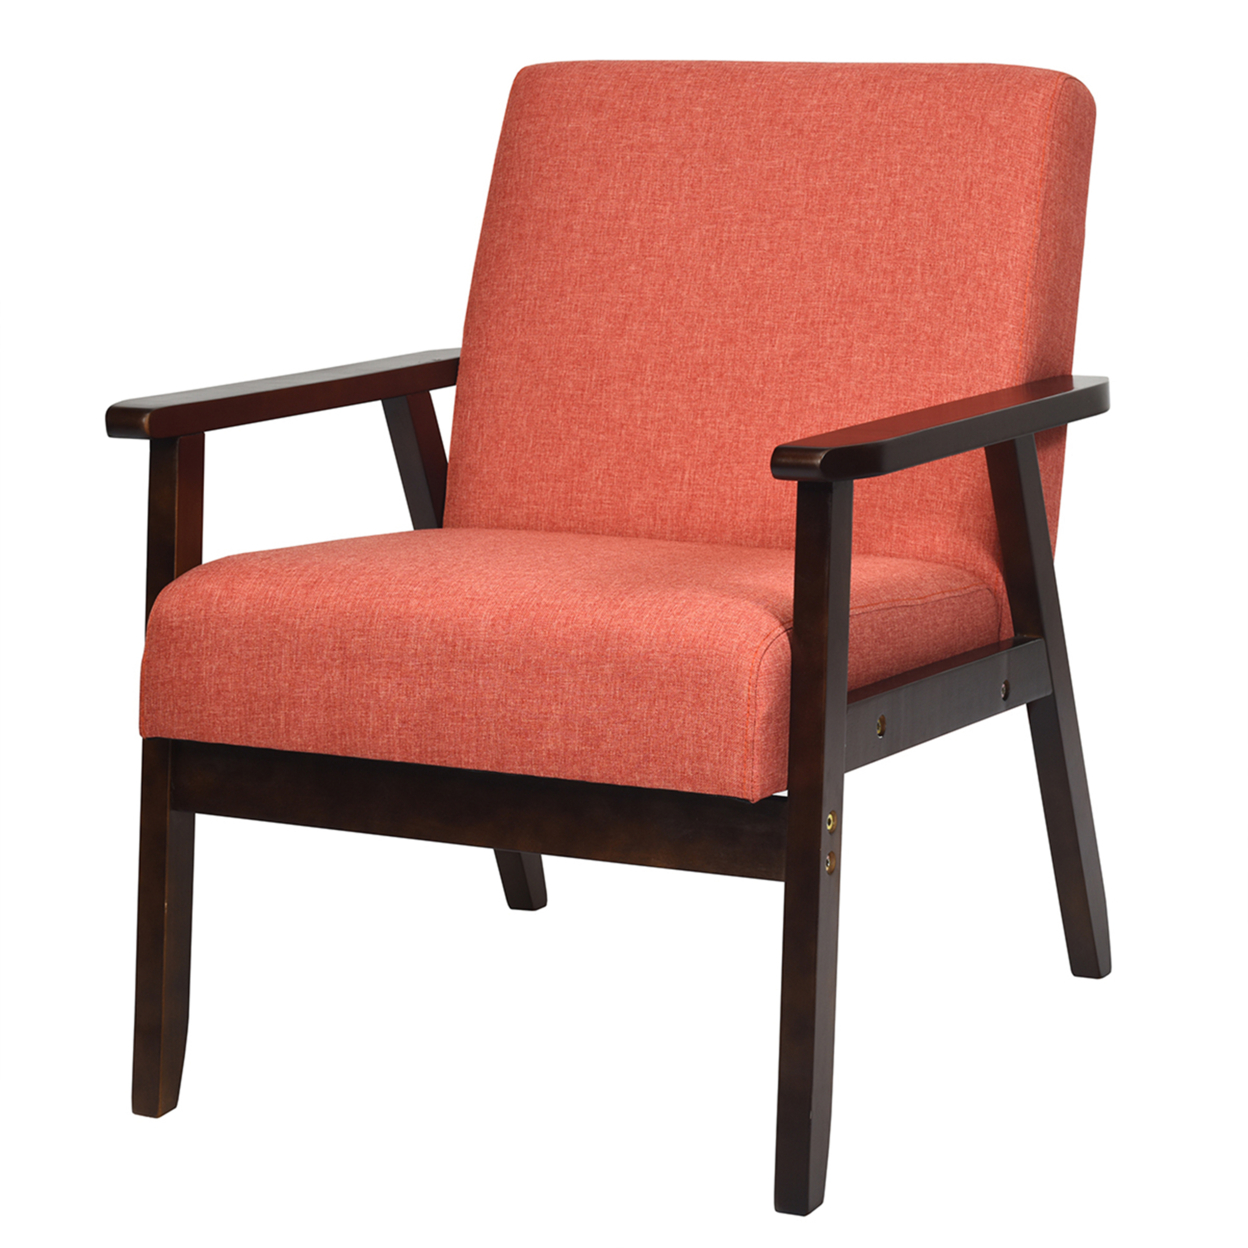 Wooden Upholstered Accent Chair Fabric Armchair Home Office - Orange